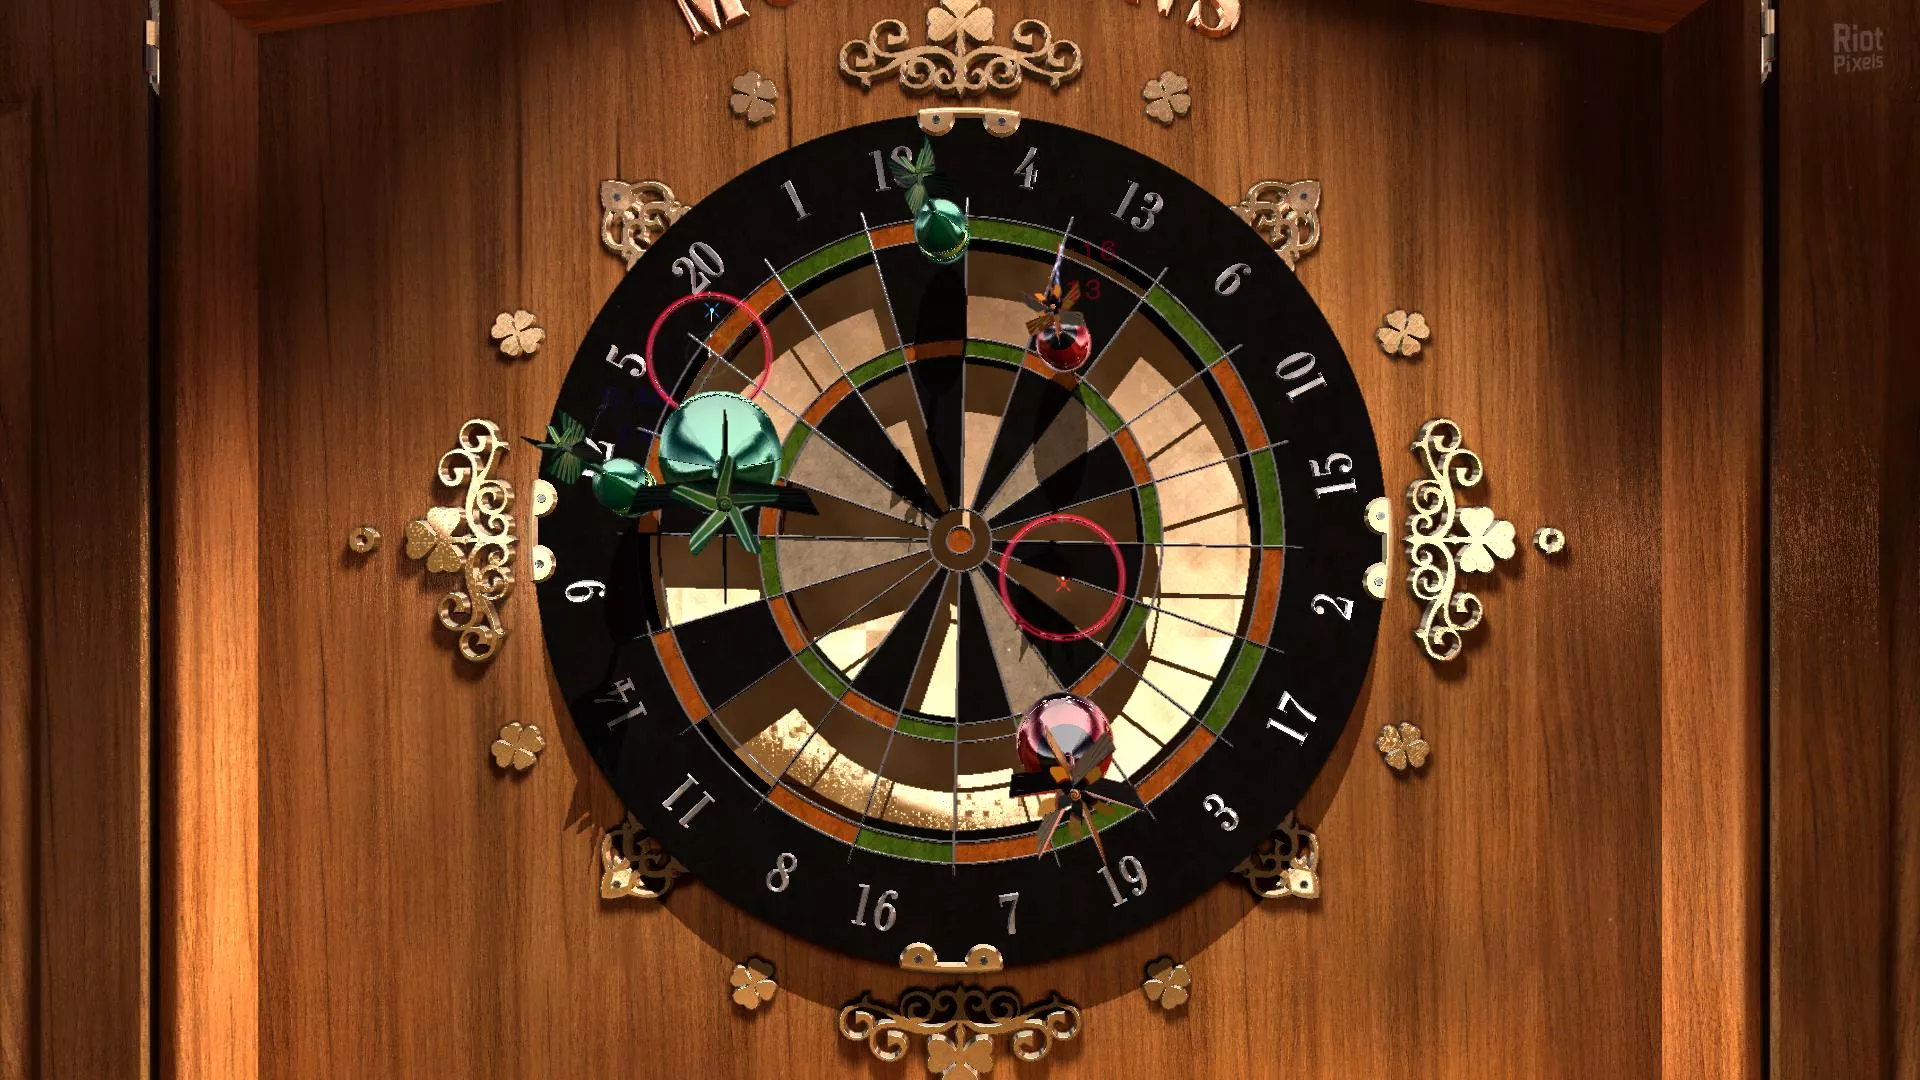 Entre Darts III in Spain, Europe | Darts - Rated 0.7